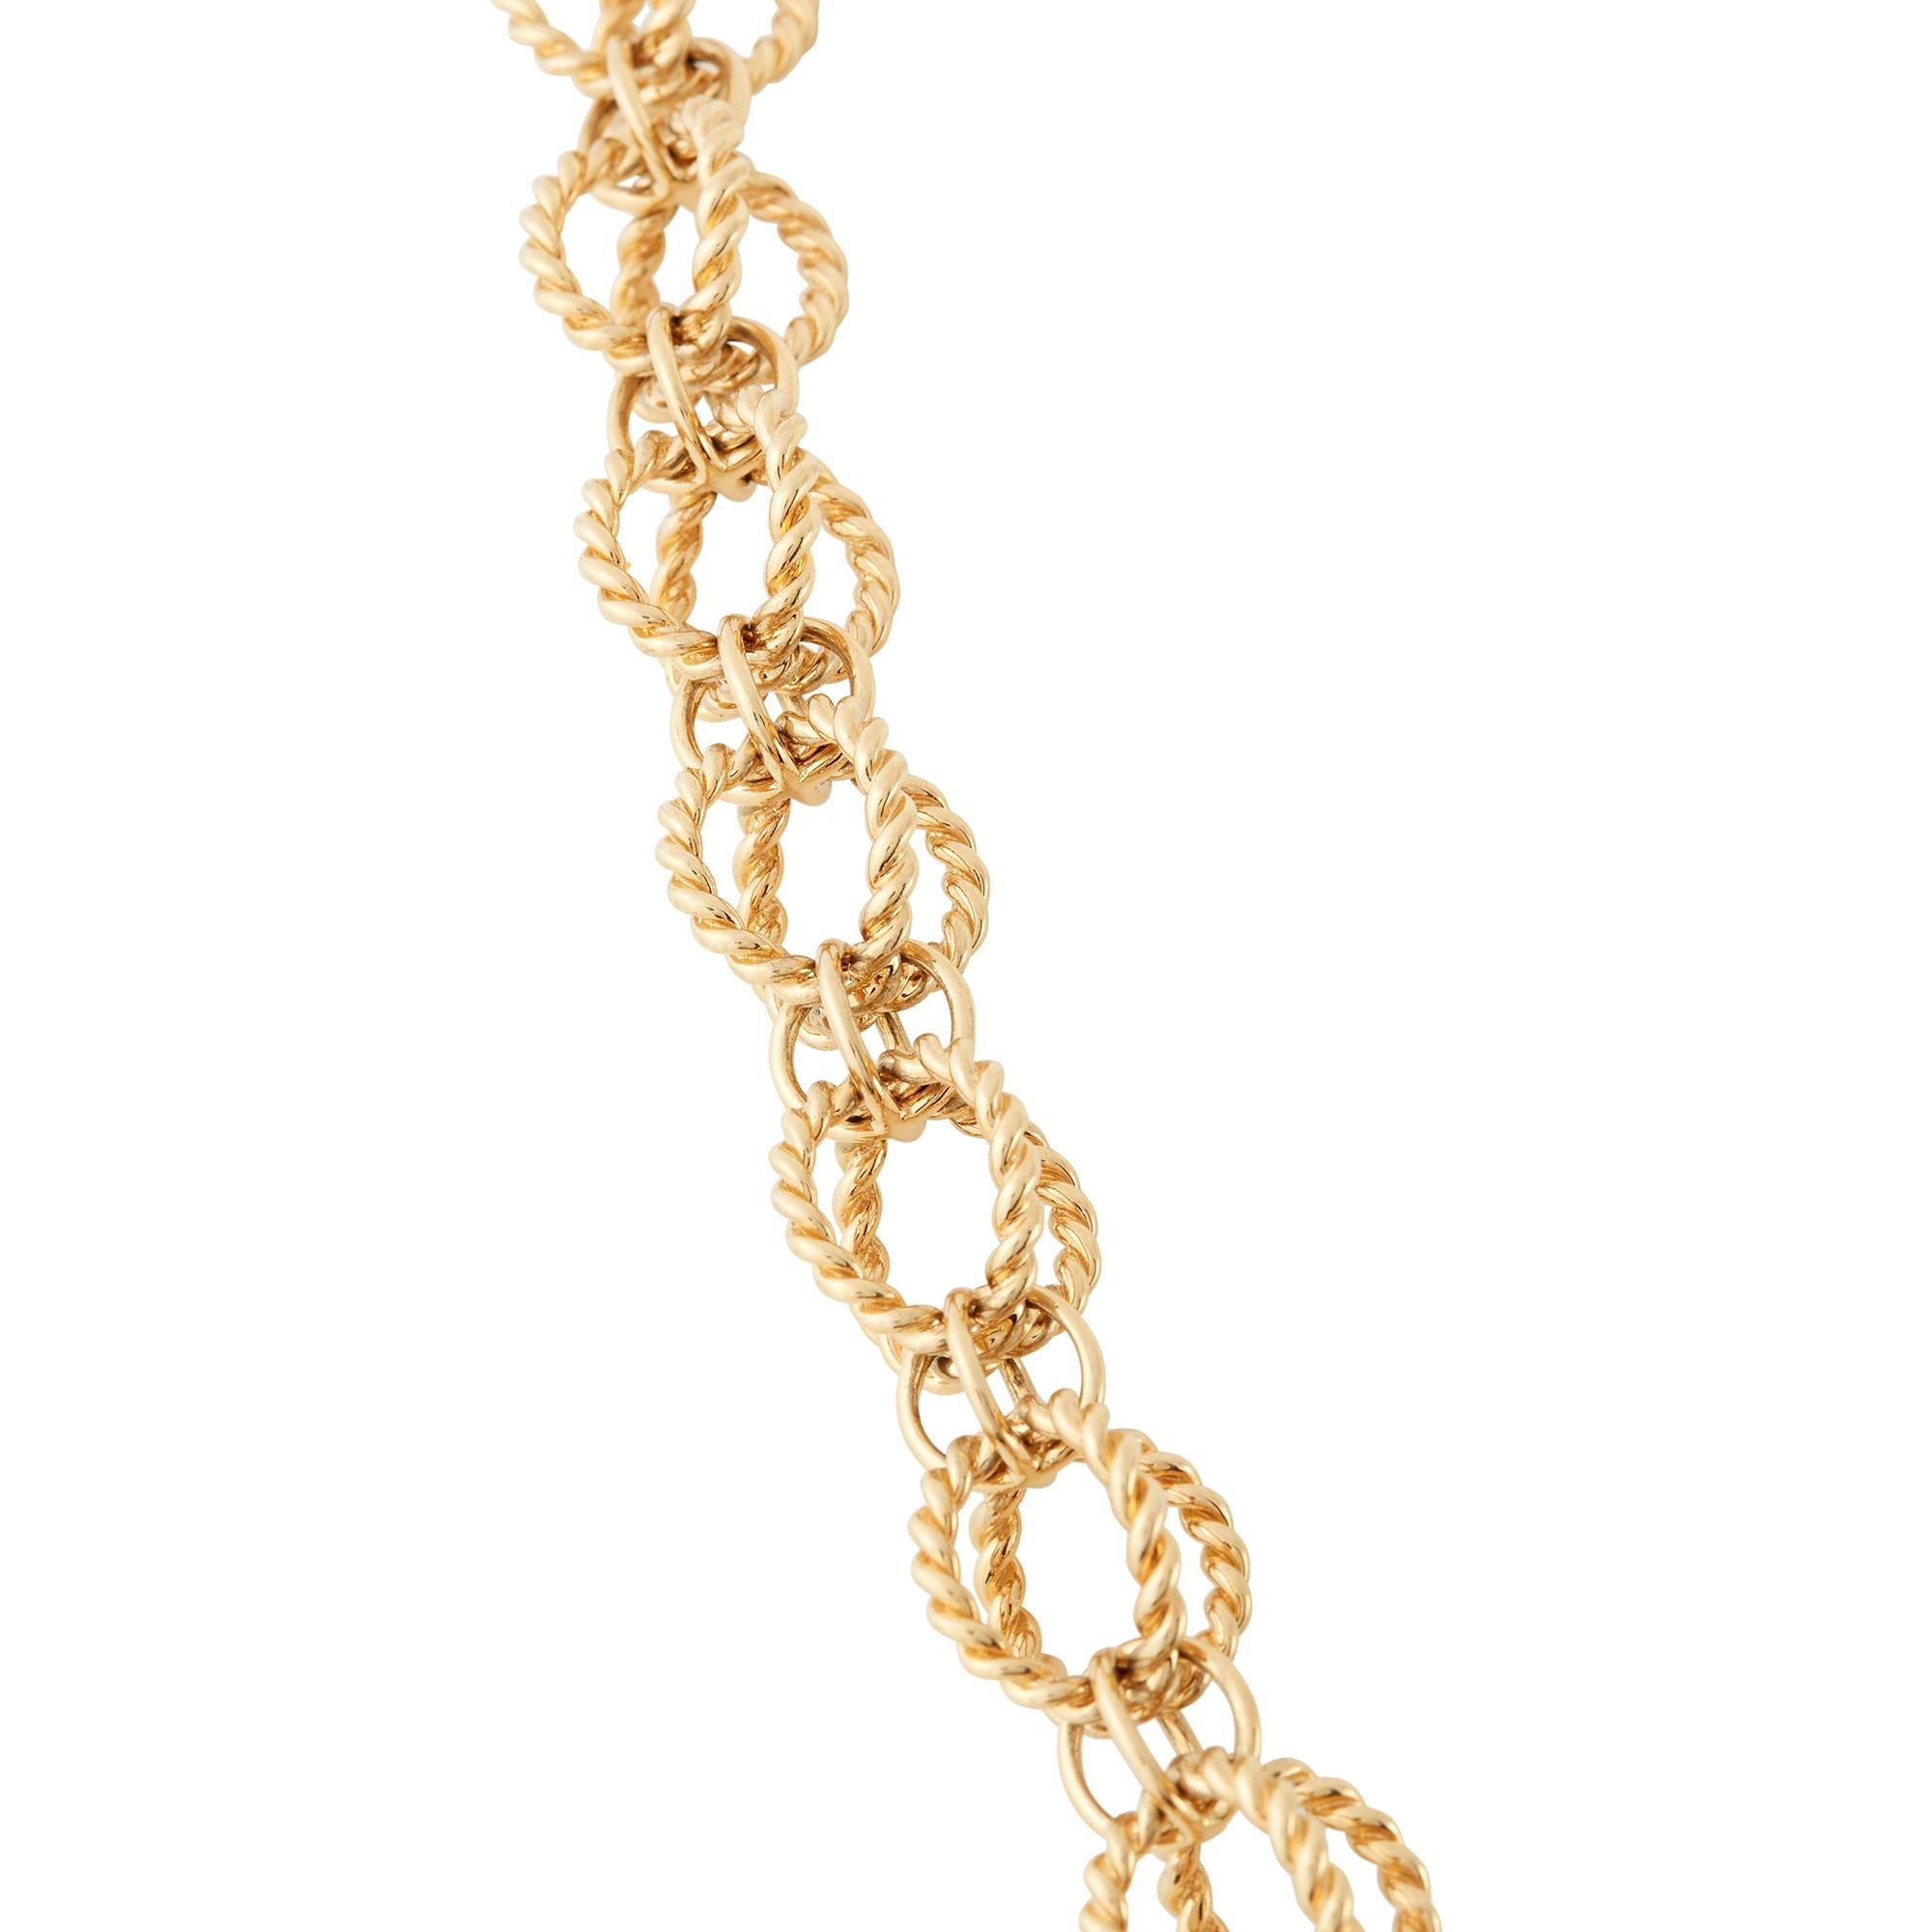 Authentic Jean Schlumberger for Tiffany & Co. Circle Rope necklace crafted in 18 karat yellow gold.  The necklace is comprised of interlocking spherical links of high polished rope-textured gold.  Necklace measures 18 inches in length and is